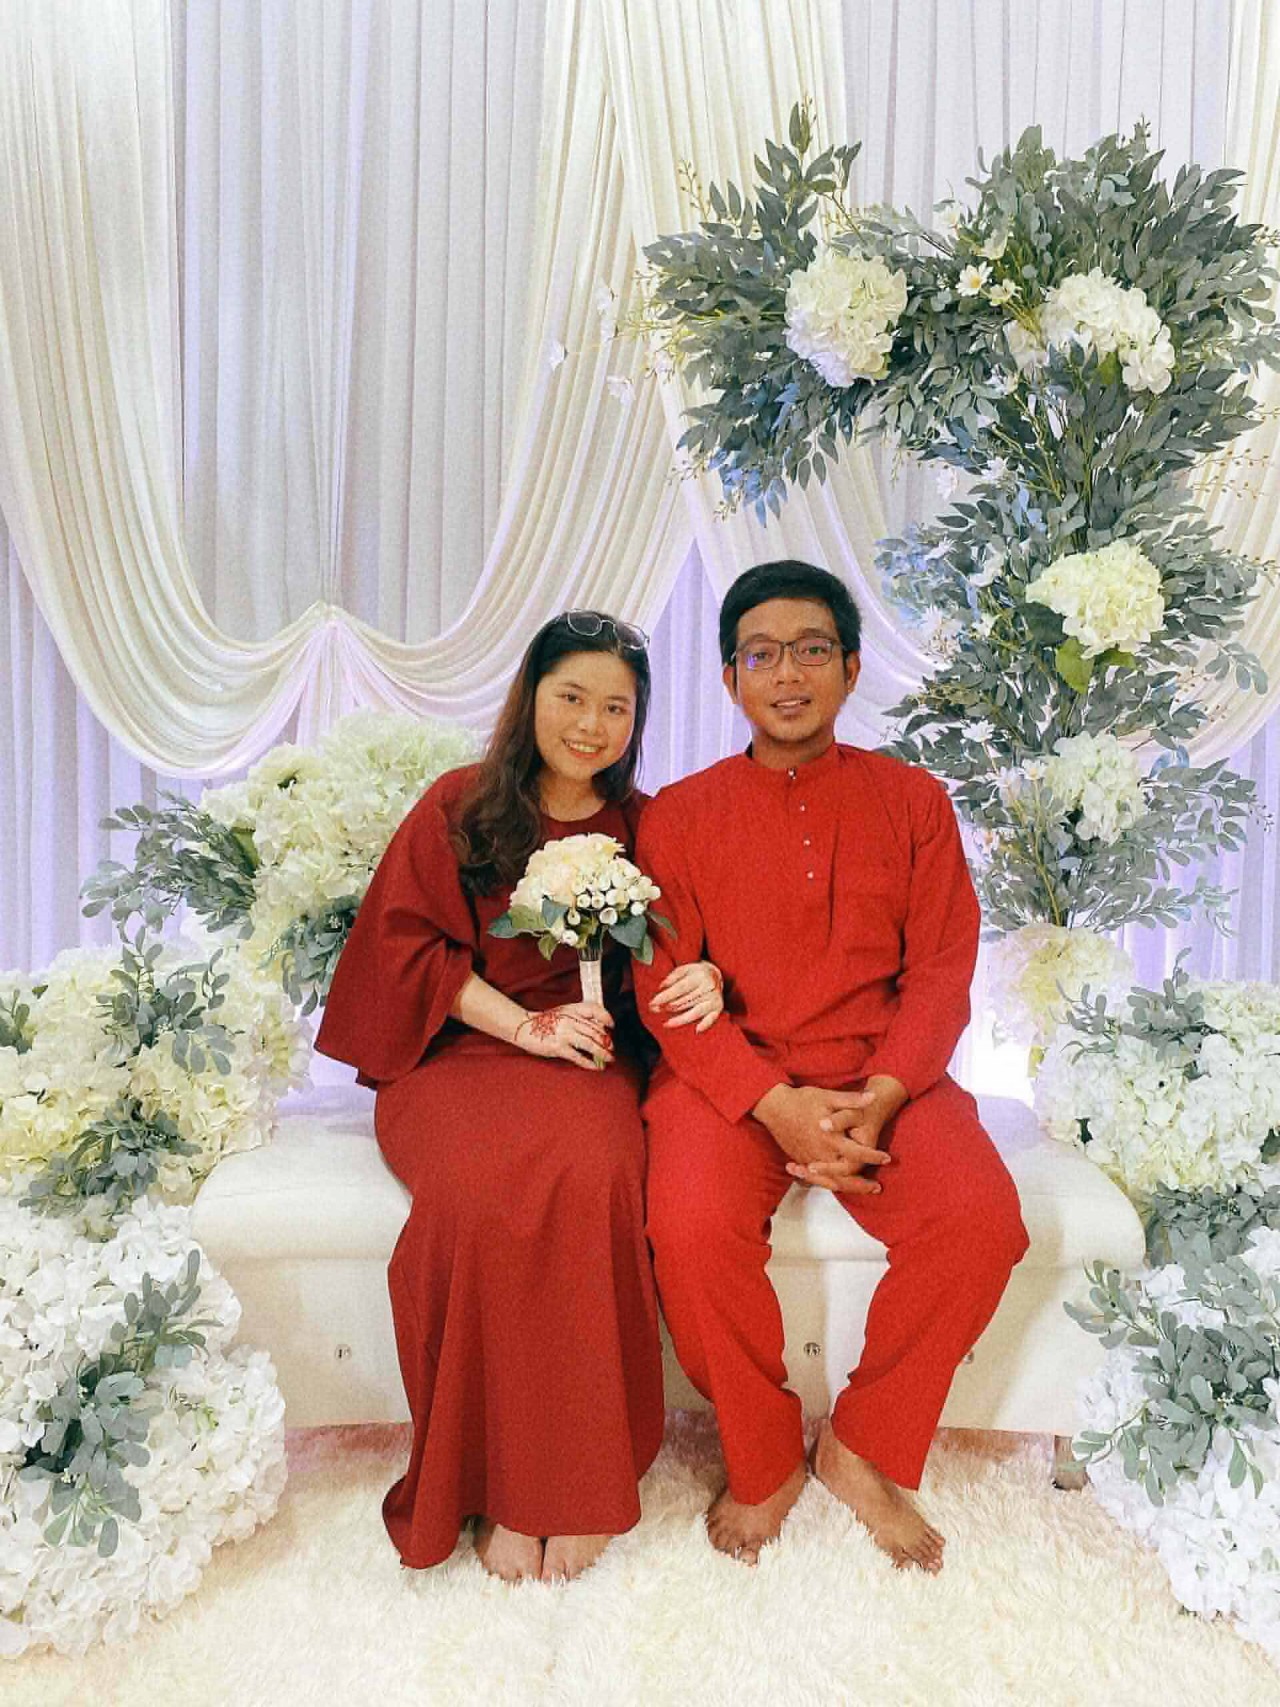 Dong Nhi and her fiance. Photo: NVCC